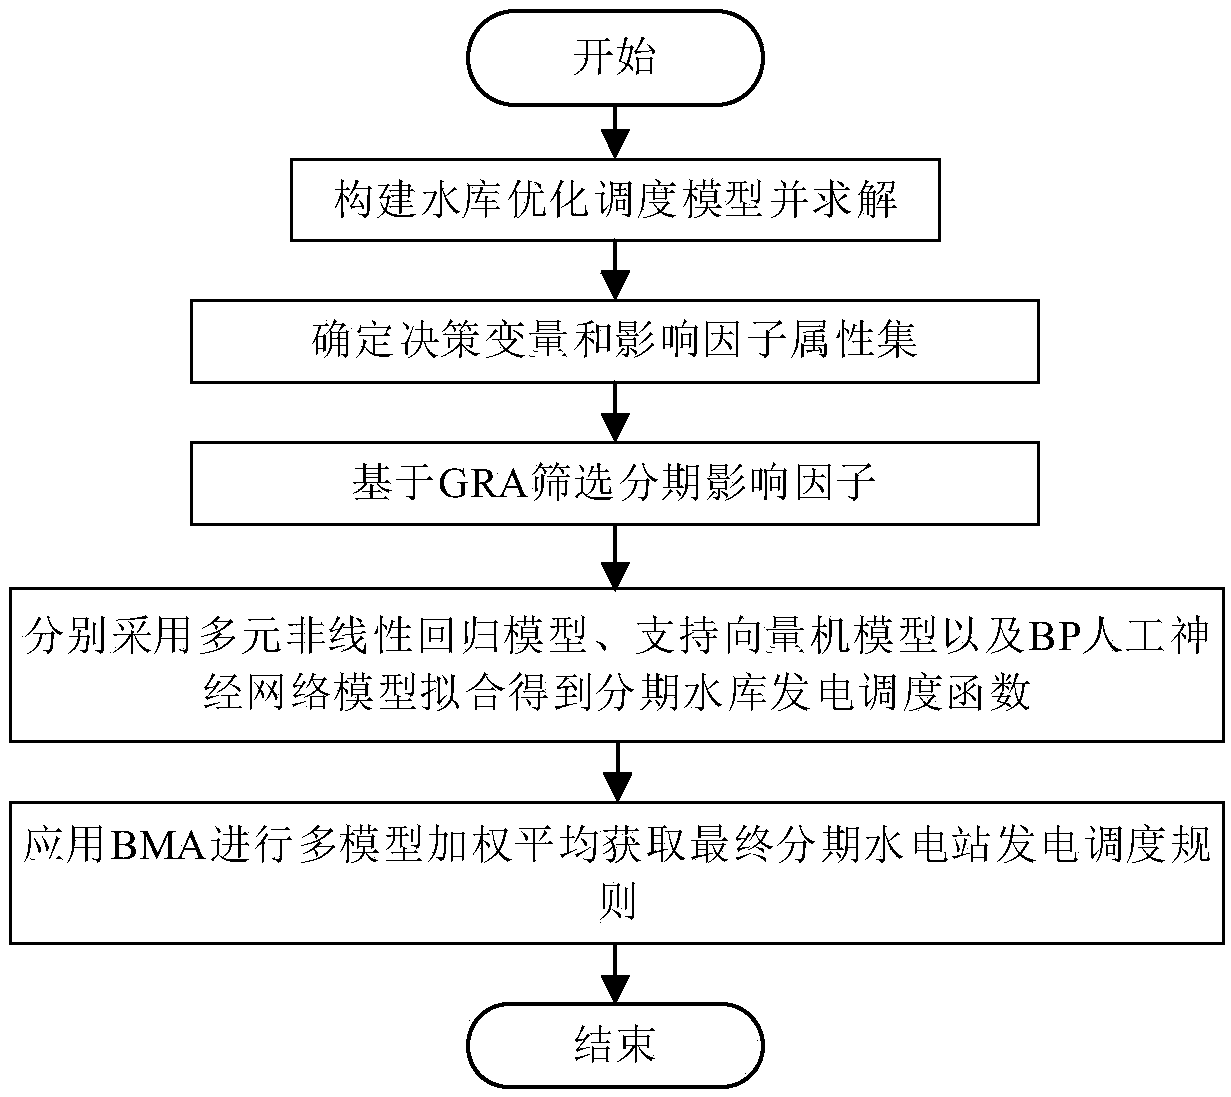 Reservoir stage power generation scheduling rule extraction method